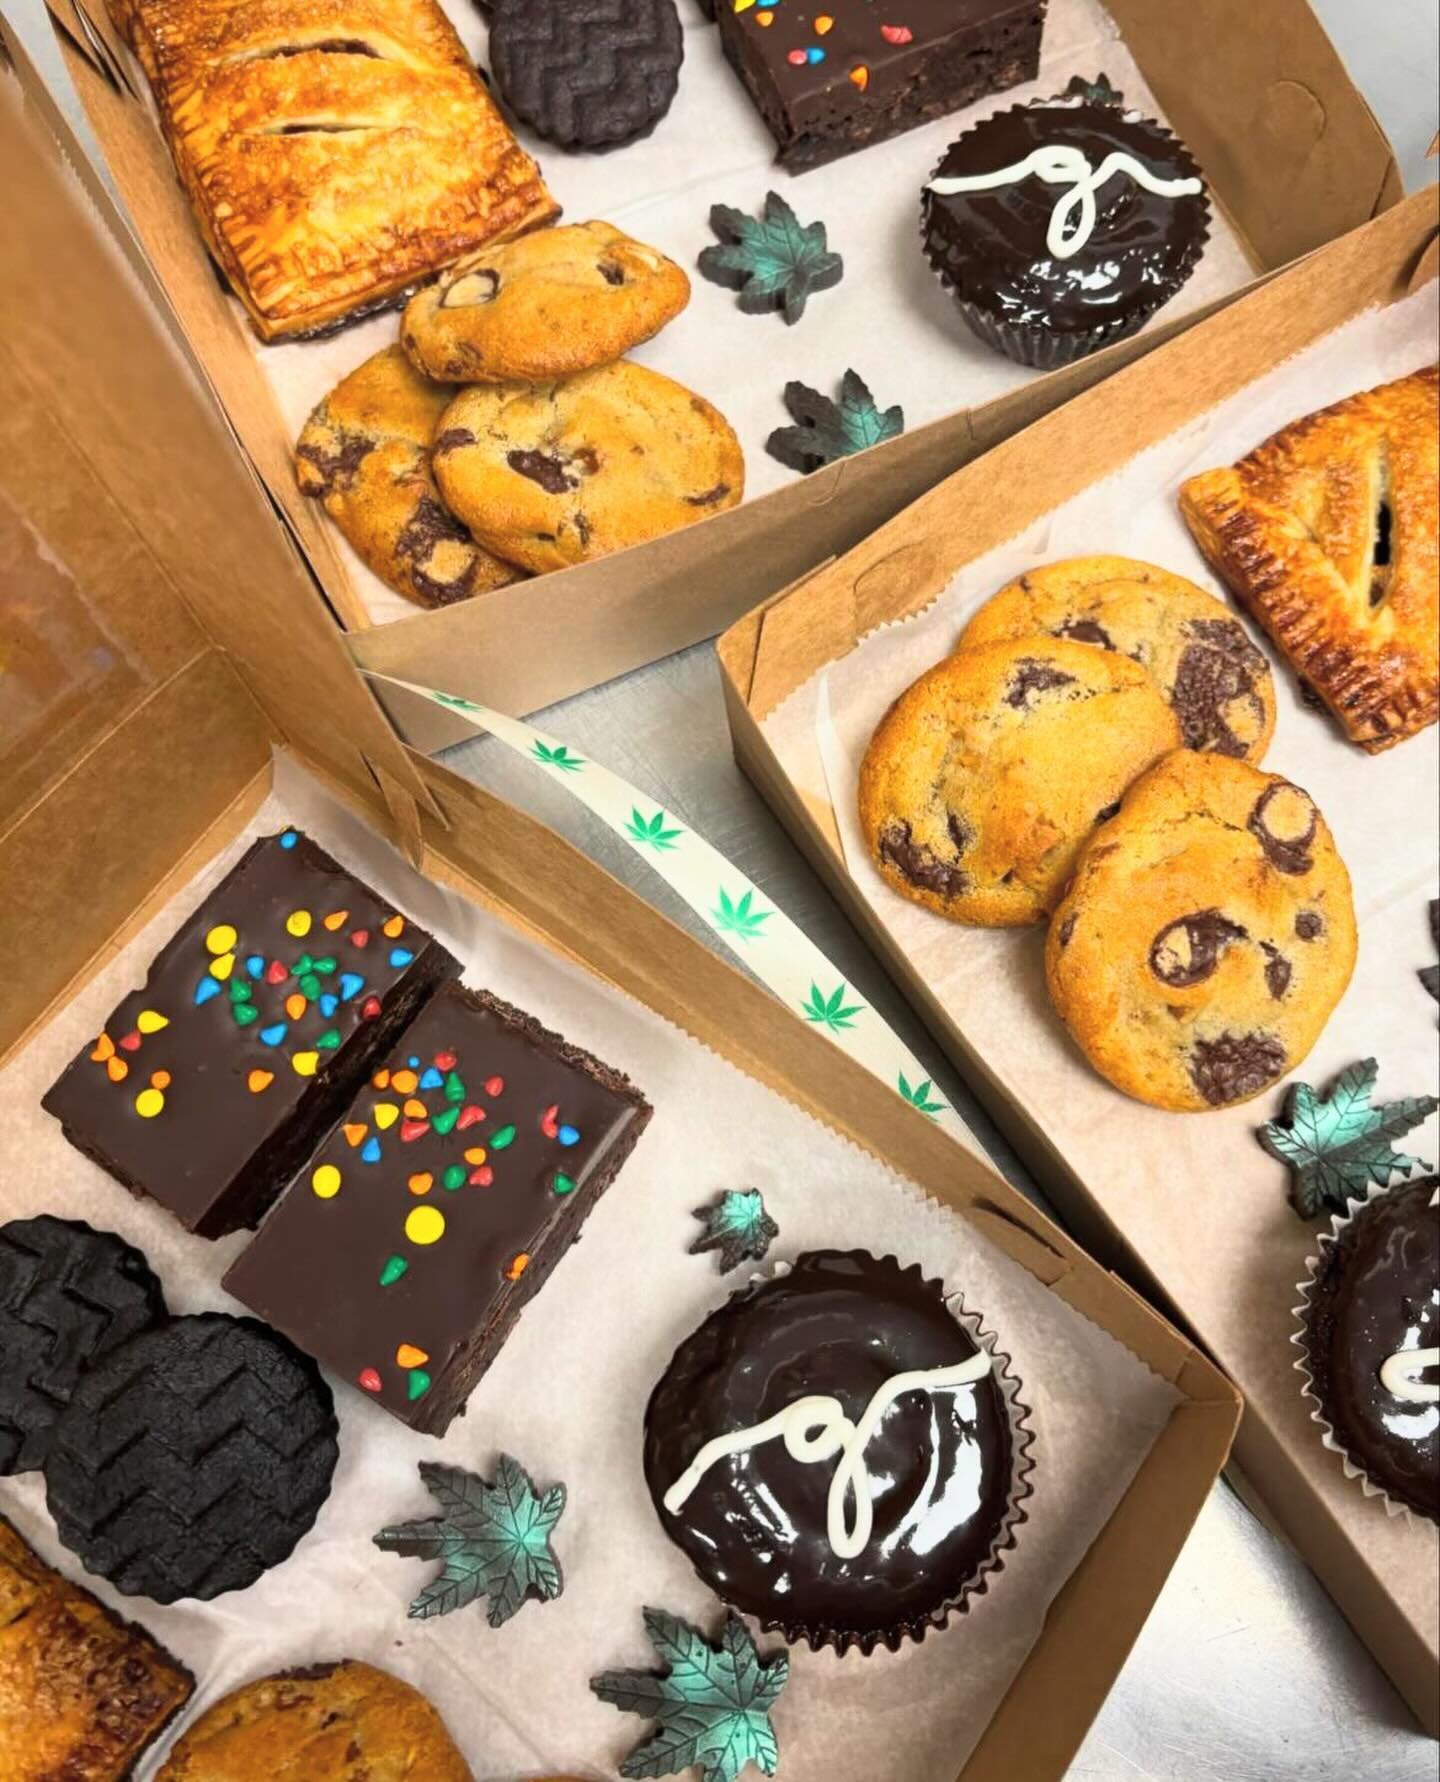 Munchies boxes have been released into the wild and they are scrumptious 😋 

#munchies #420 #shadysideeats #pittsburghfoodie #pghbakery #pittsburghcoffee #supportlocal #shadysidecafe #pittsburghbrunch #pghcafe #localflavors #pghfoodscene #h2p #cmu  